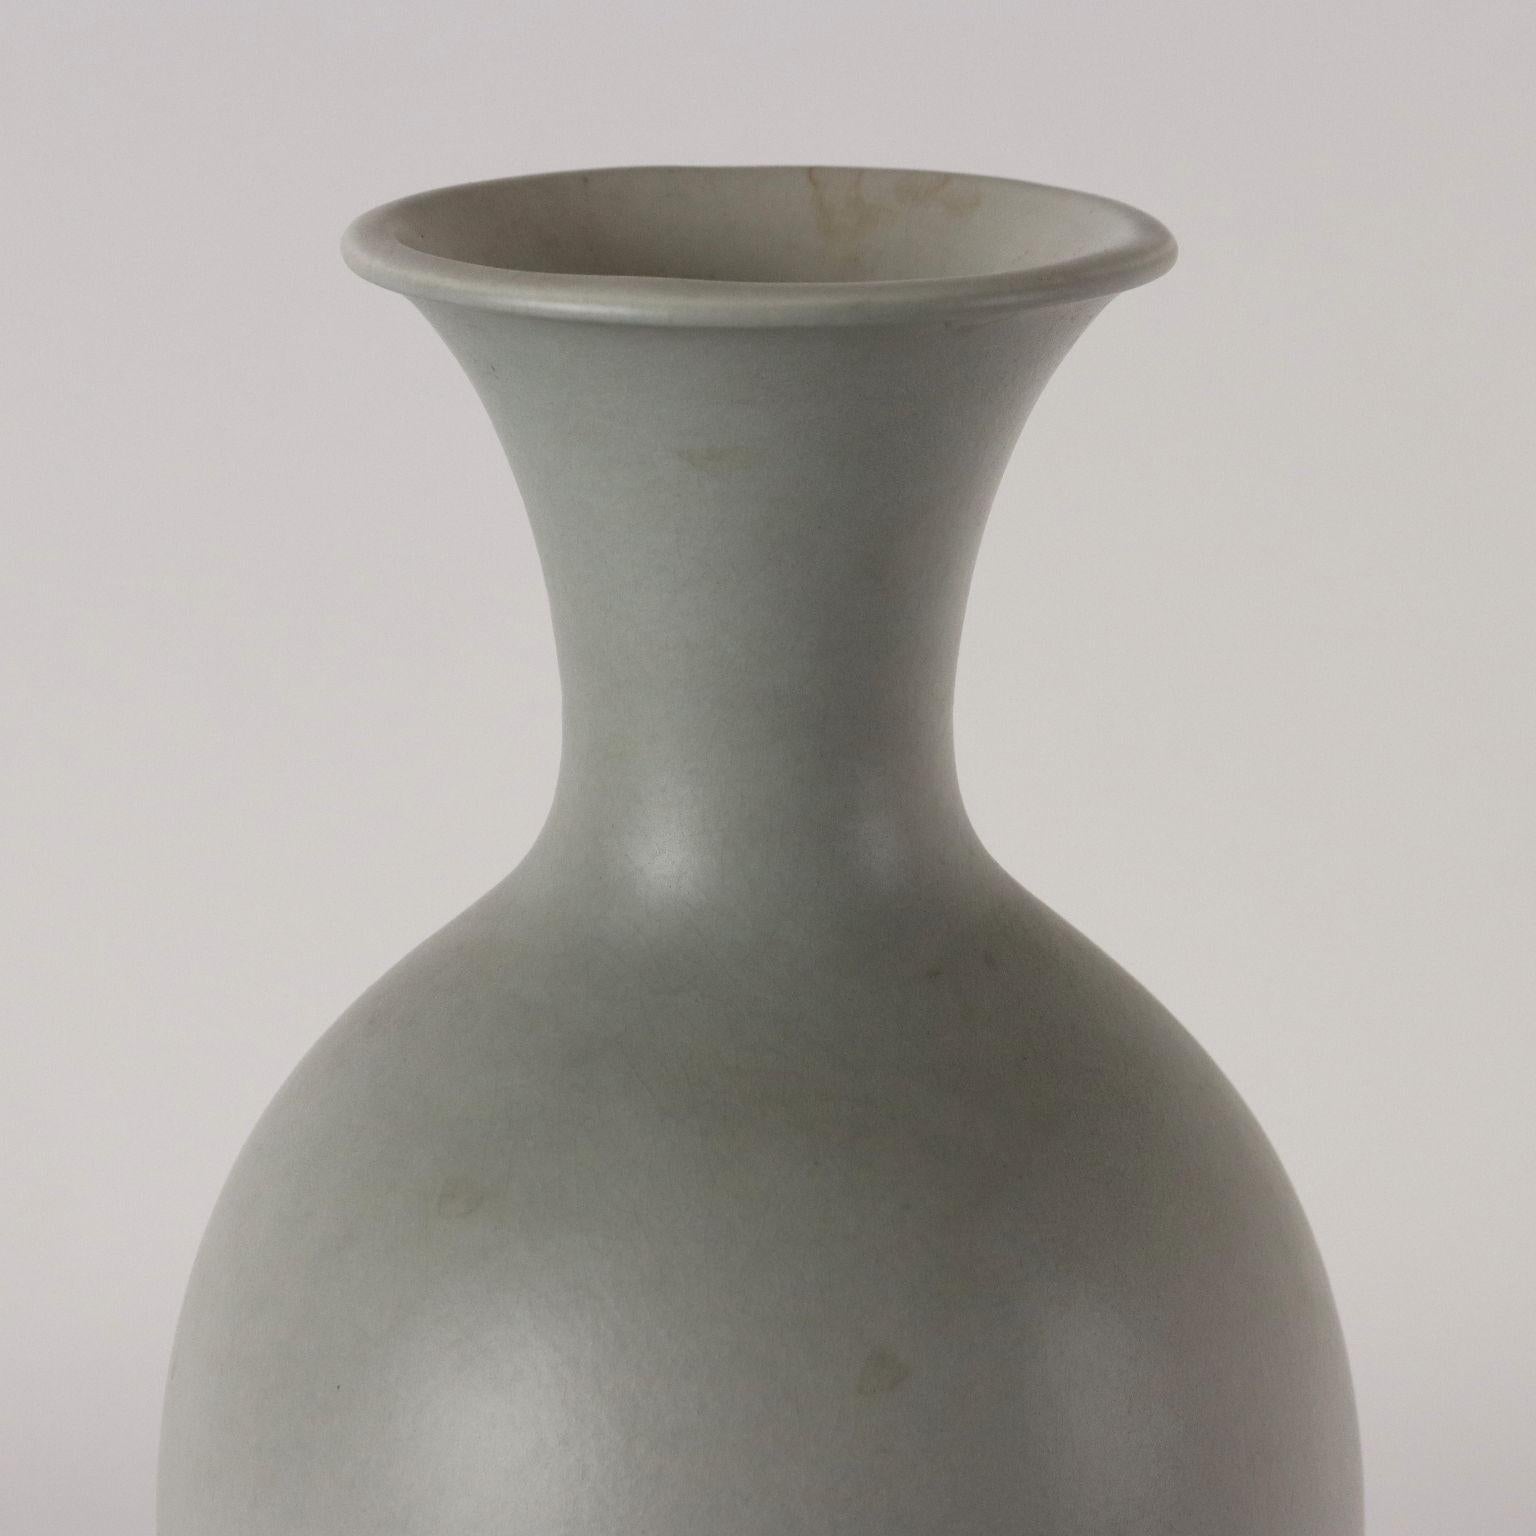 Glazed ceramic vase with relief decoration at the base. Maker's brand under the base.